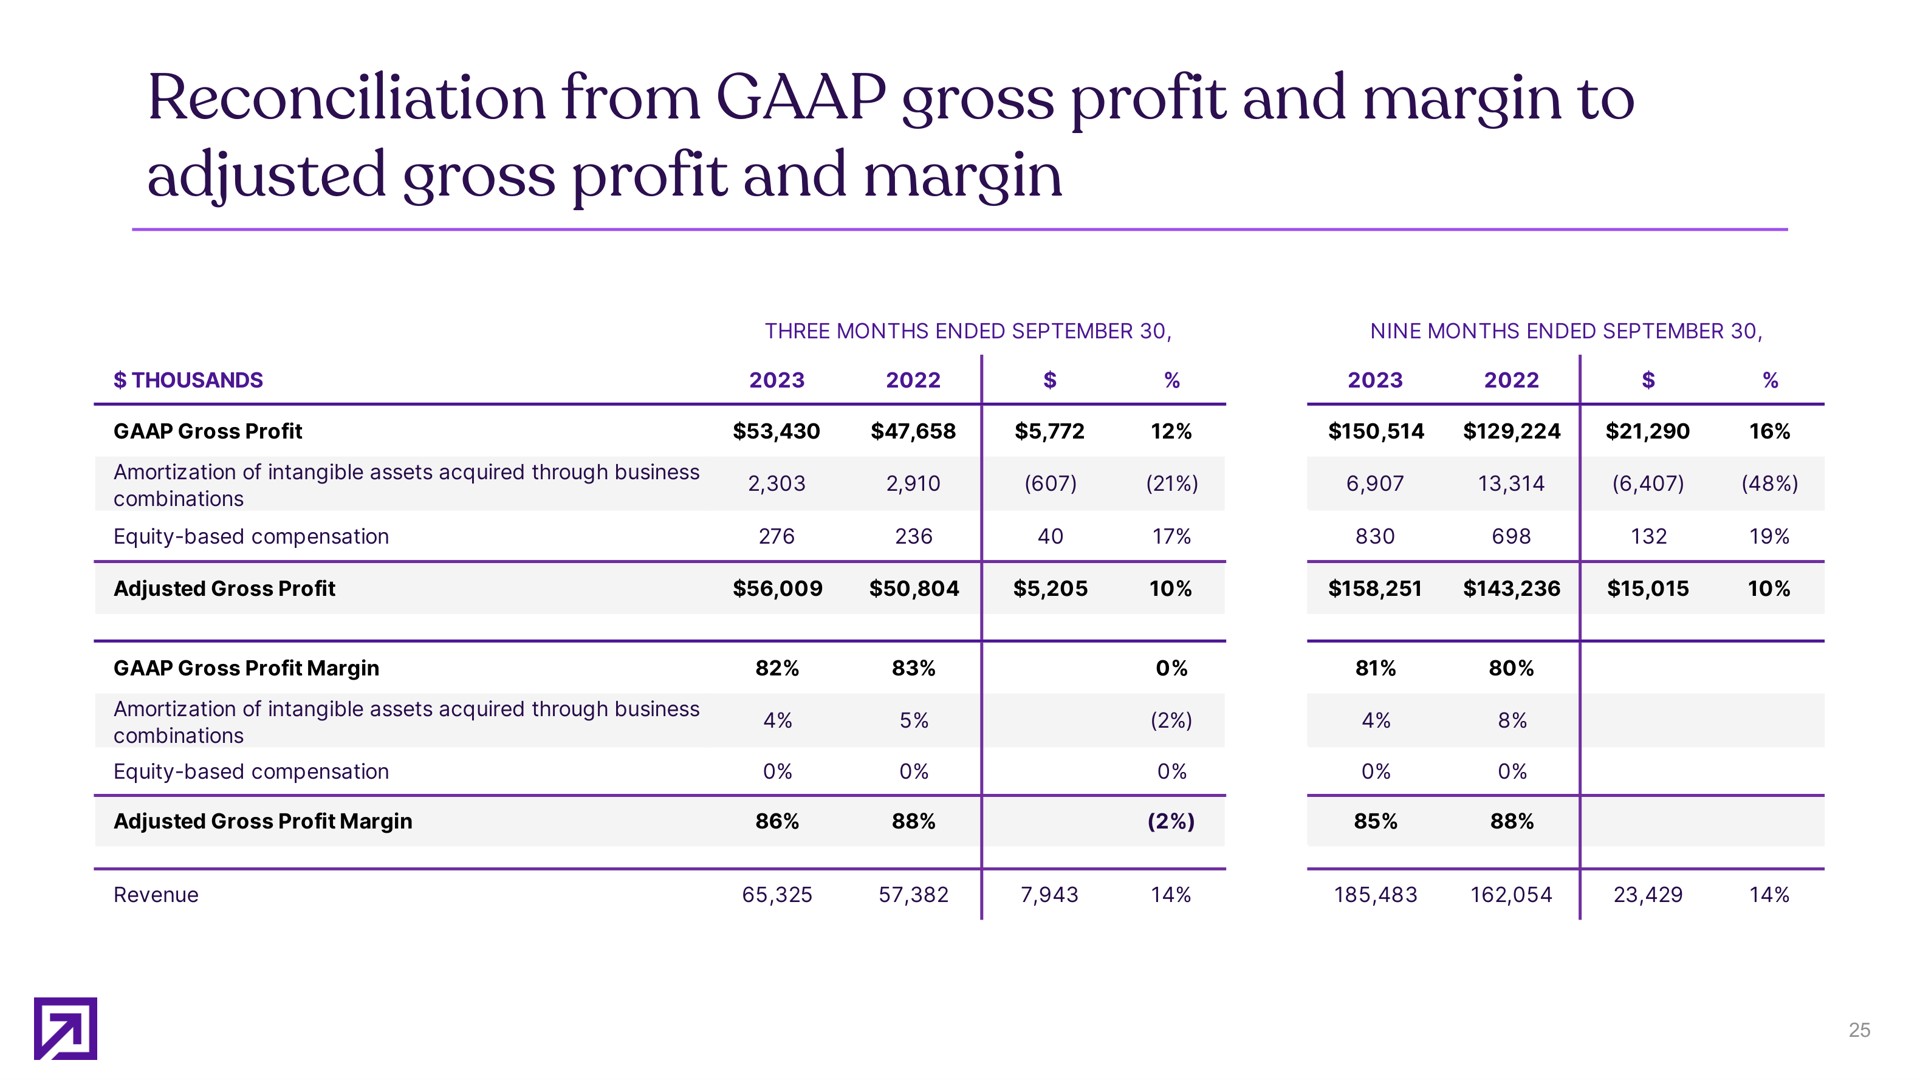 reconciliation from gross profit and margin to adjusted gross profit and margin | Definitive Healthcare